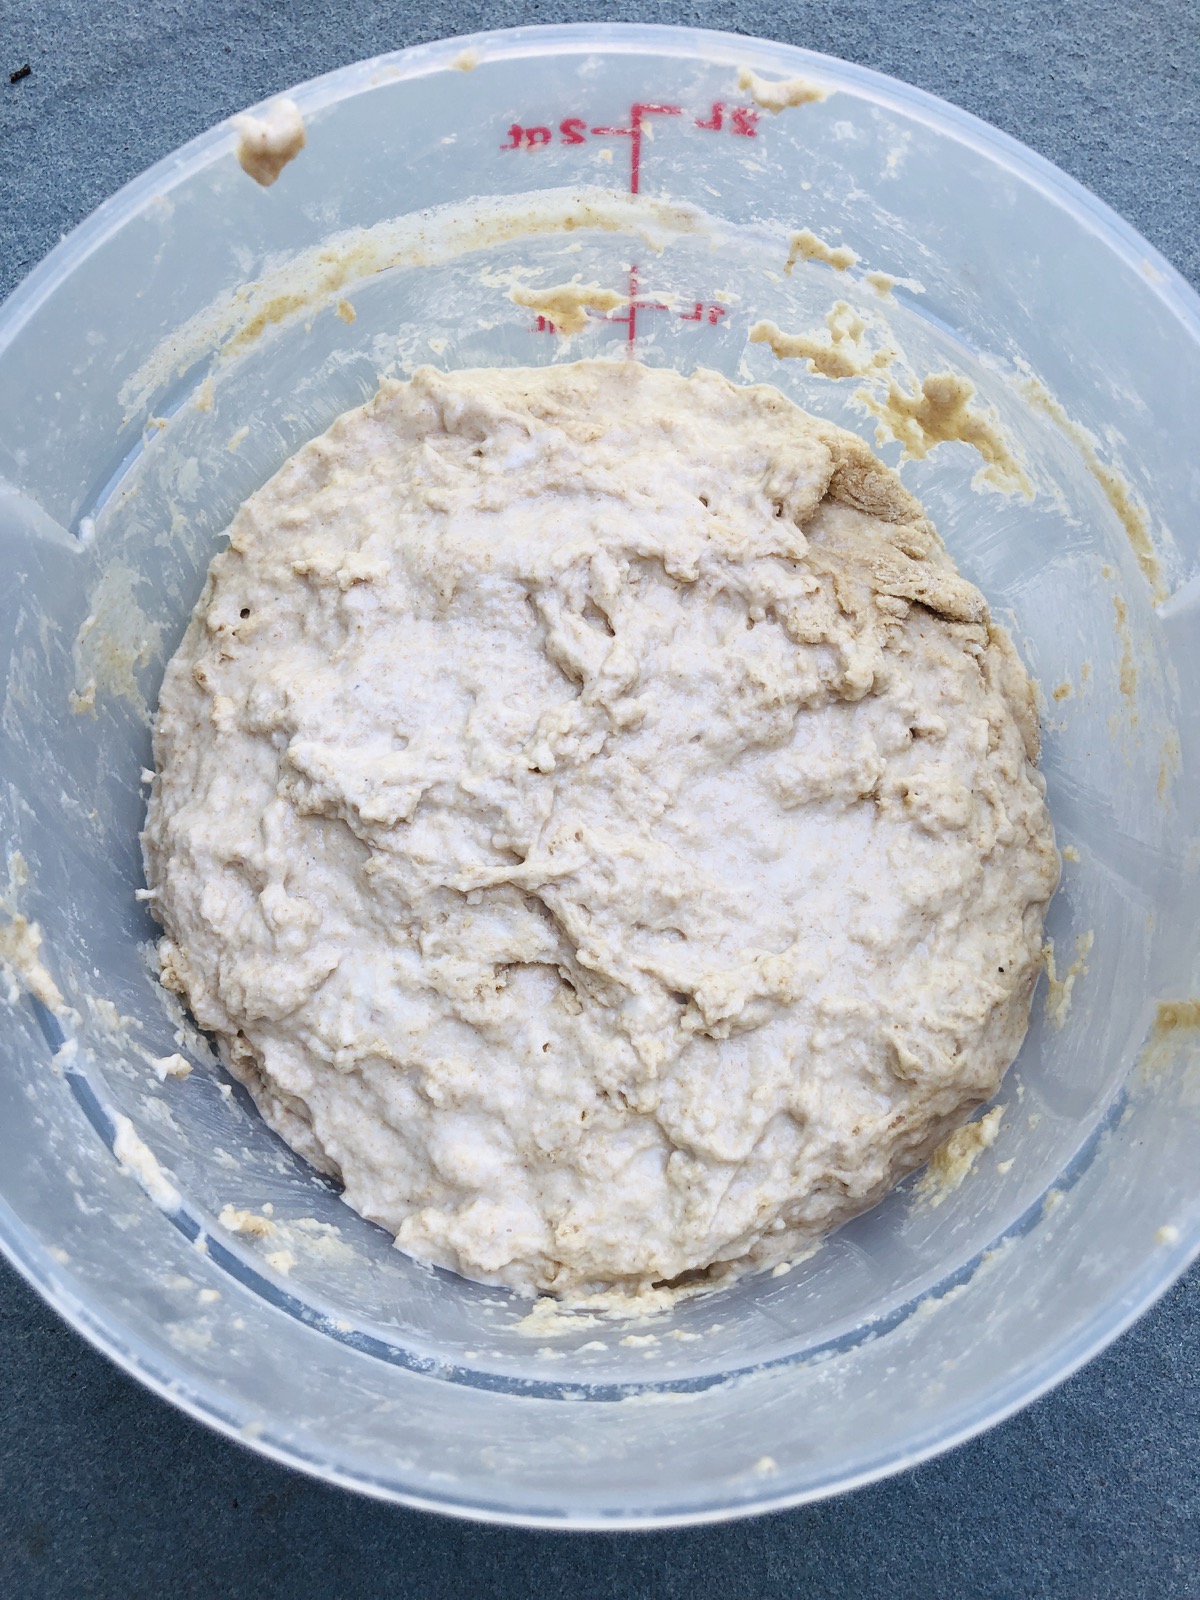 Sticky sourdough dough in a plastic tub, ready to rise.